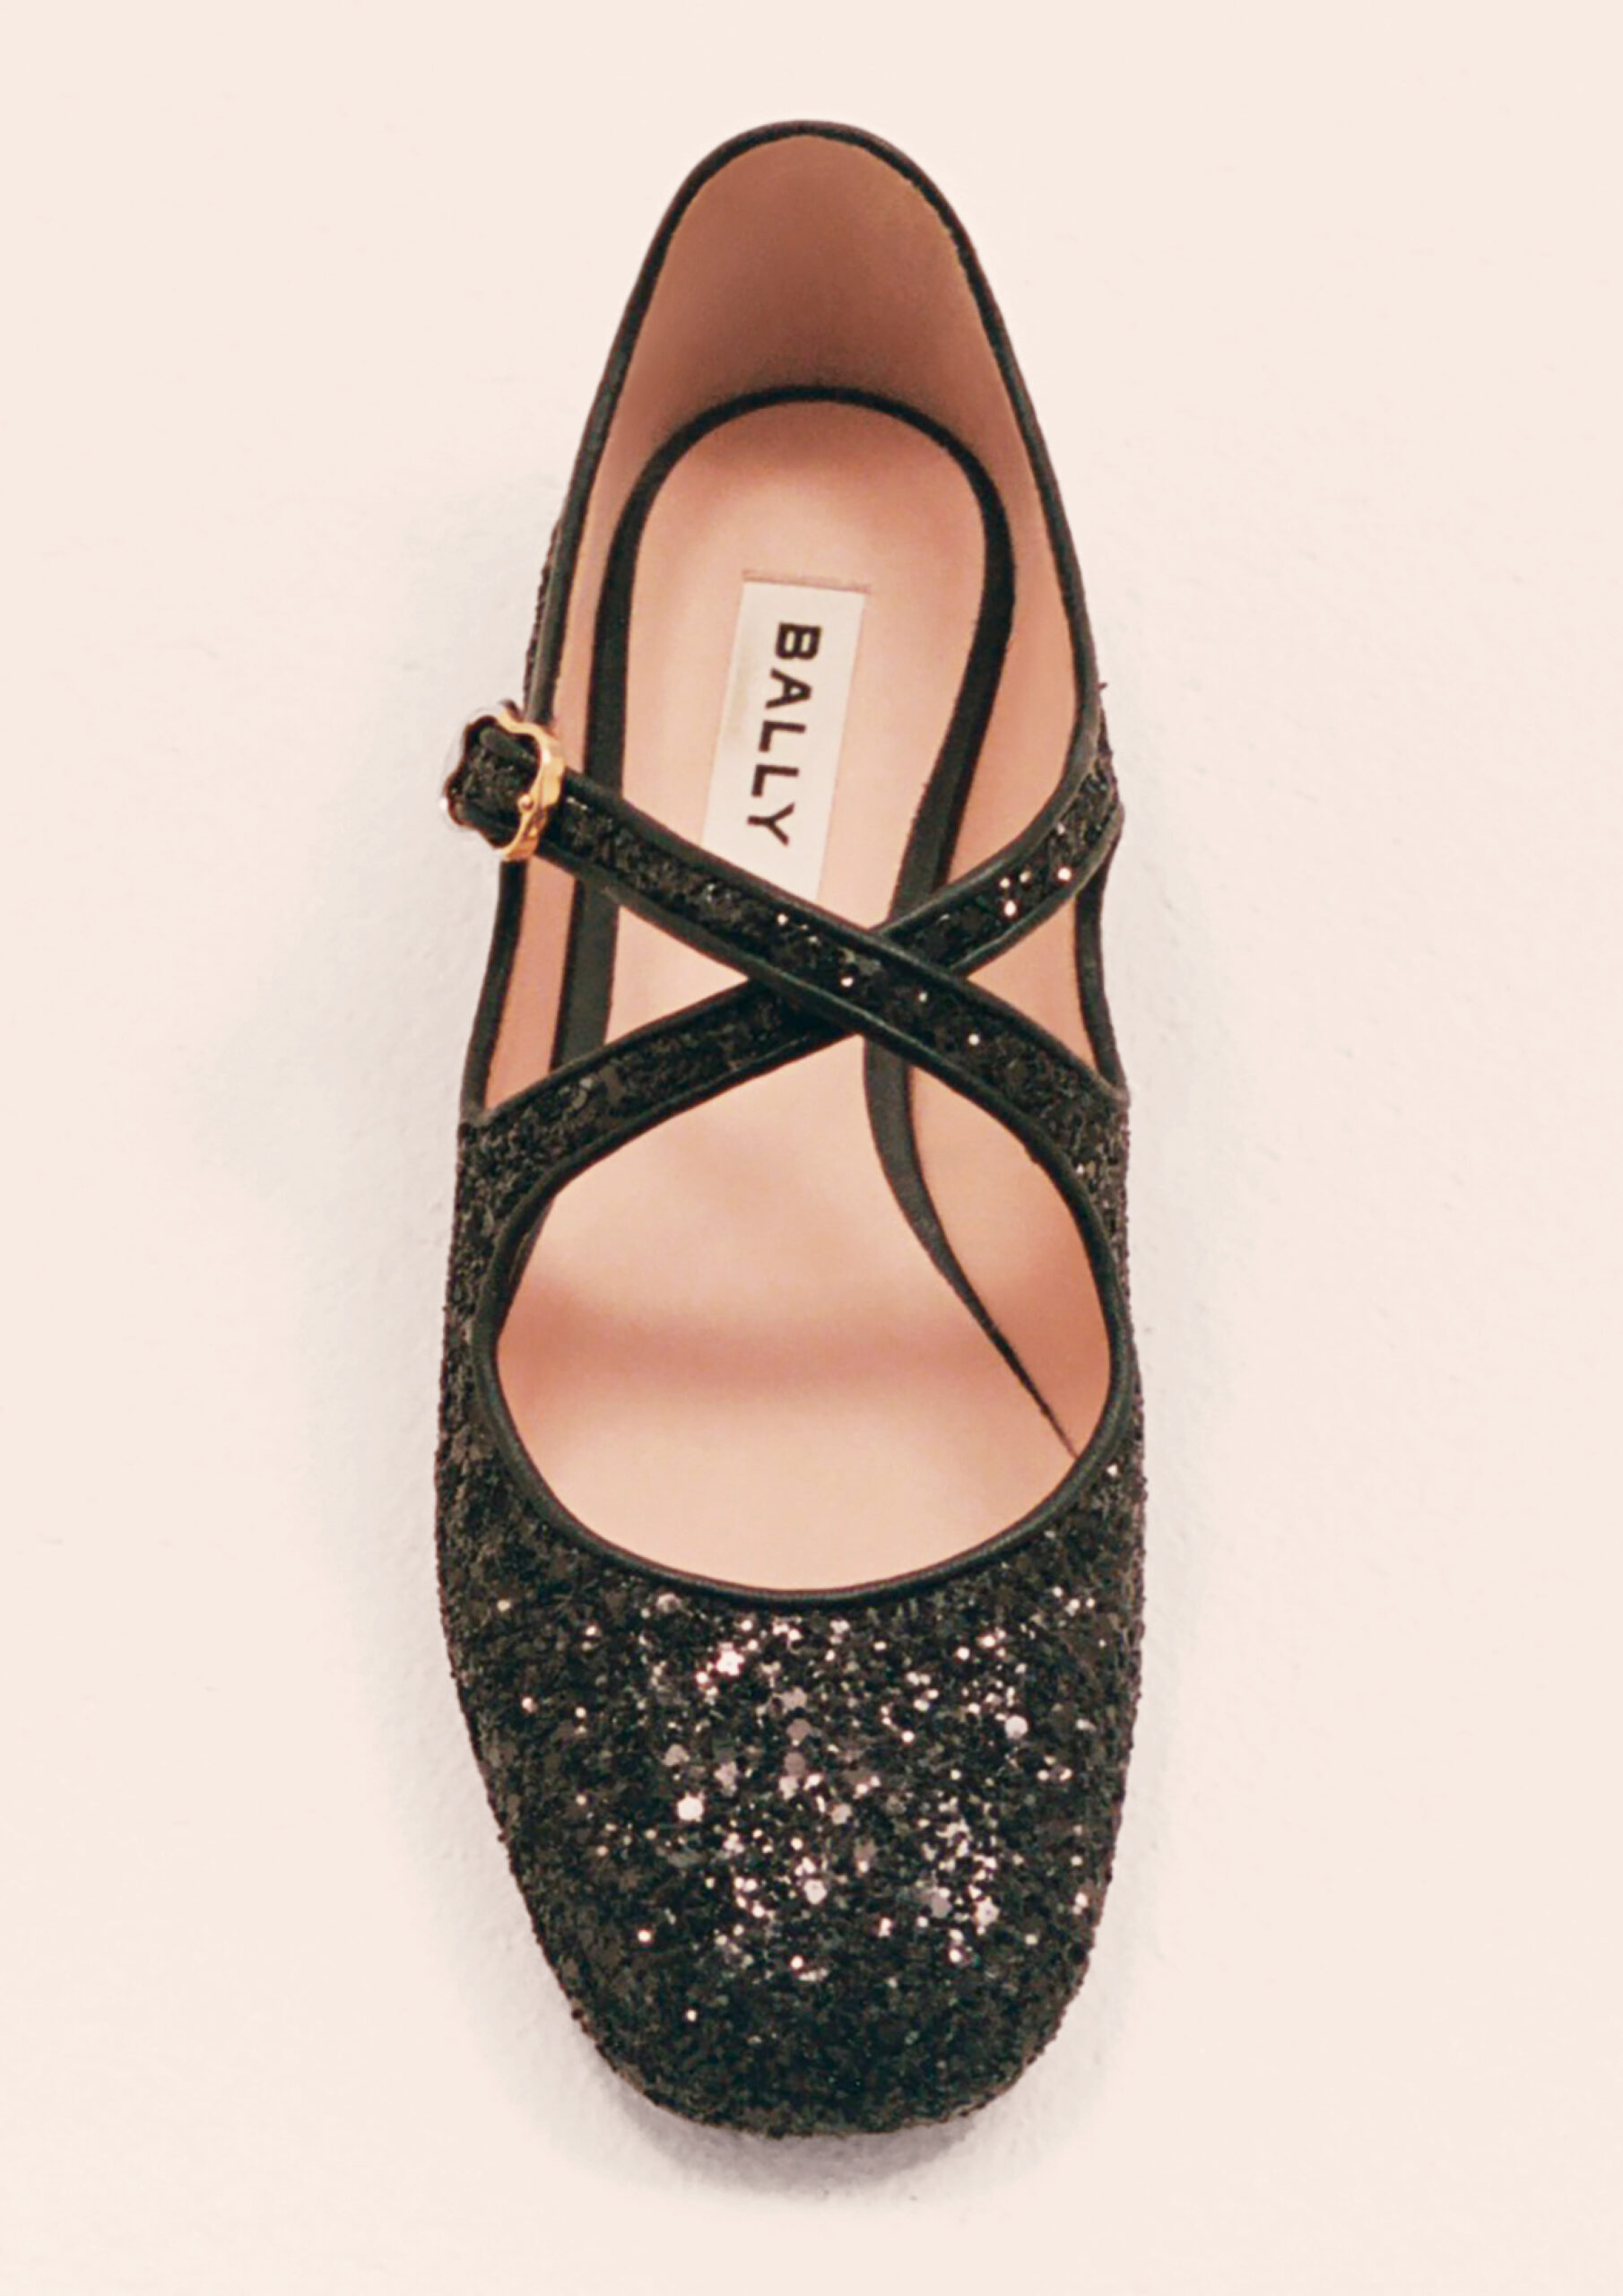 The Bally Ballyrina Collection Redefines Ballet Flats with a Blend of Timeless Heritage and Chic Modernity